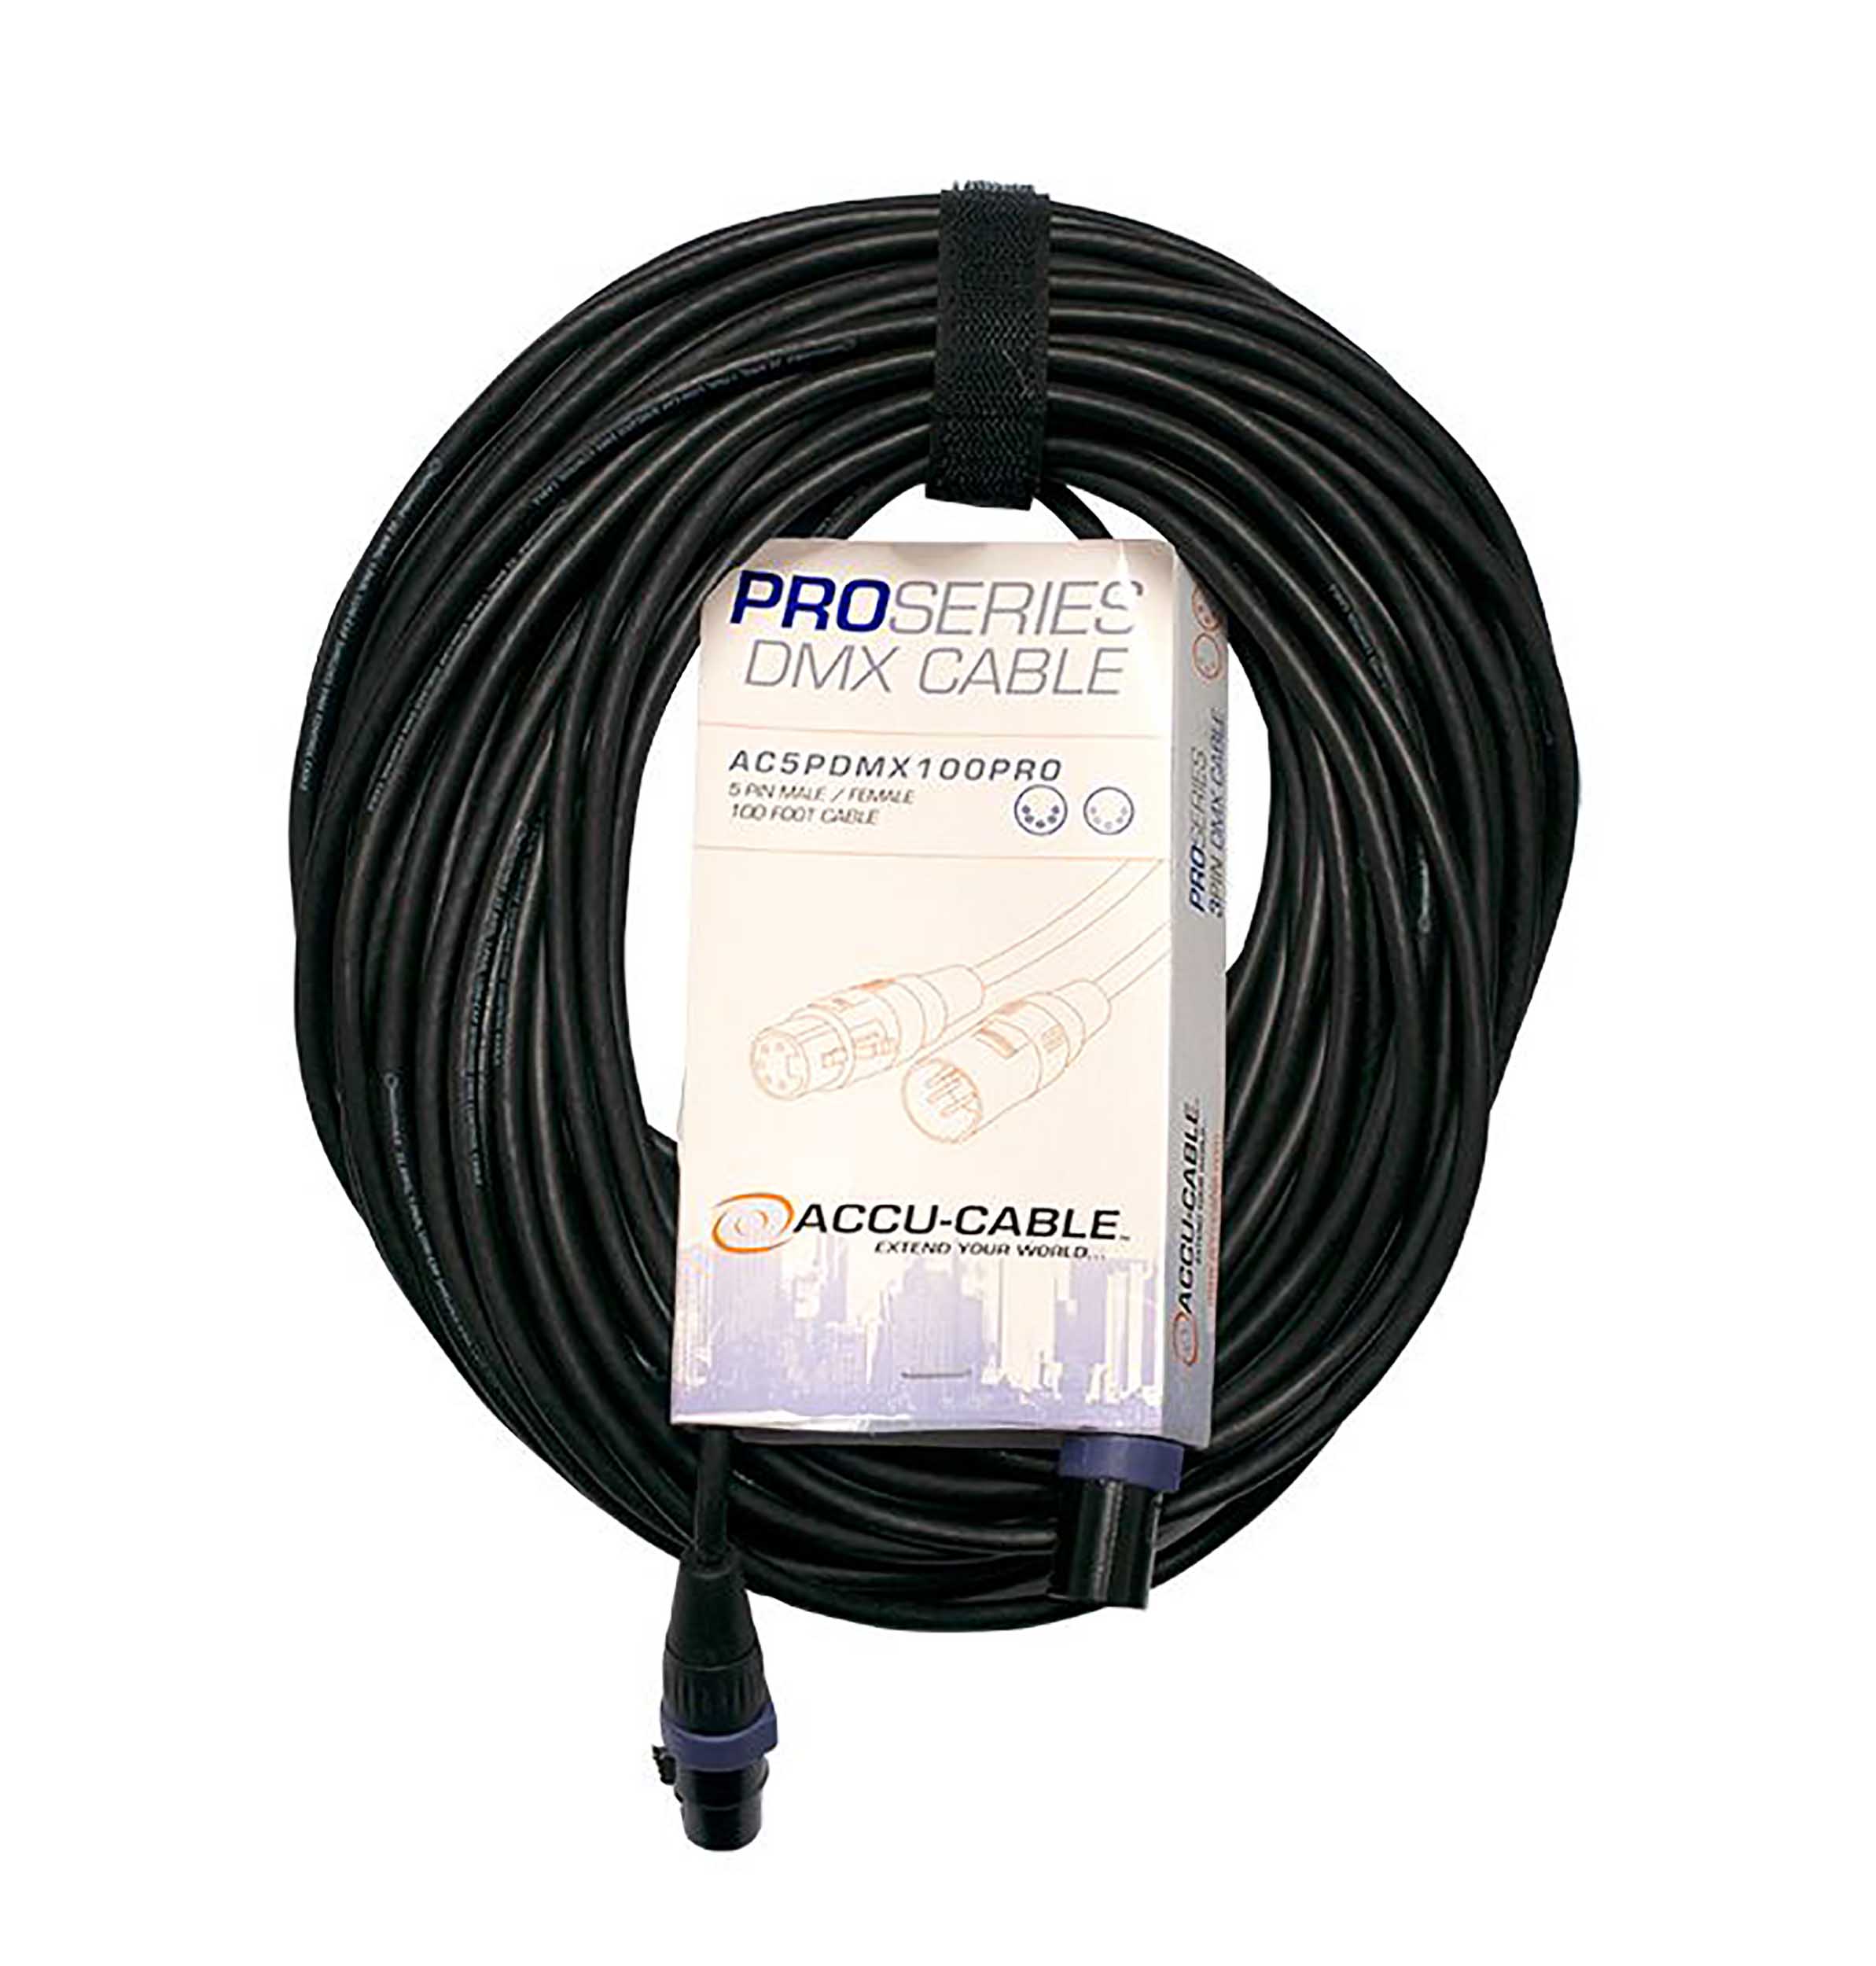 Accu-Cable AC5PDMX100PRO, Pro Series 5-Pin Male to 5-Pin Female Connection DMX Cable - 100 Ft by Accu Cable